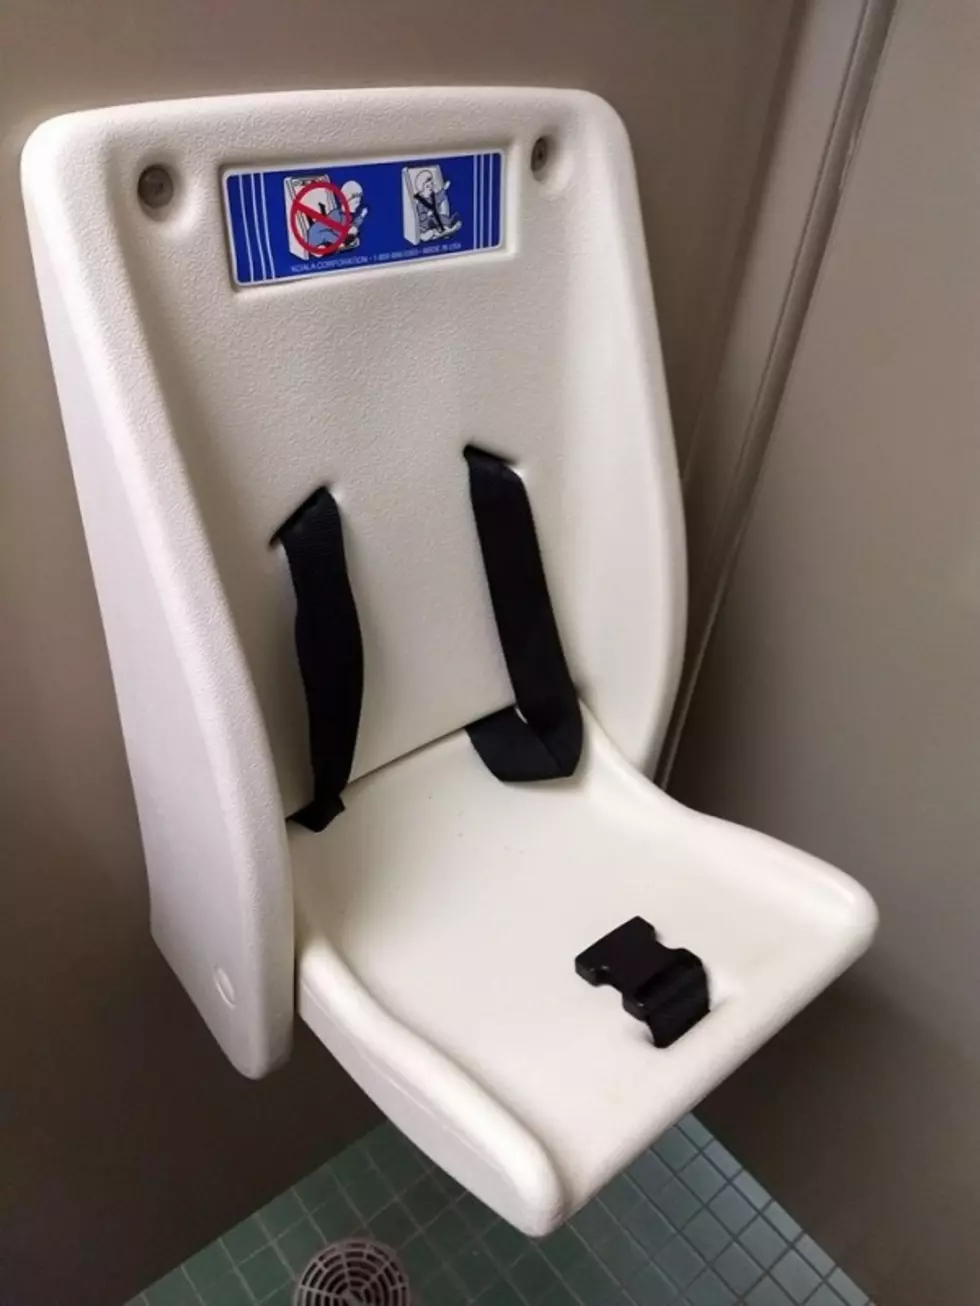 Why Isn’t This Available For Parents In Every Public Restroom?